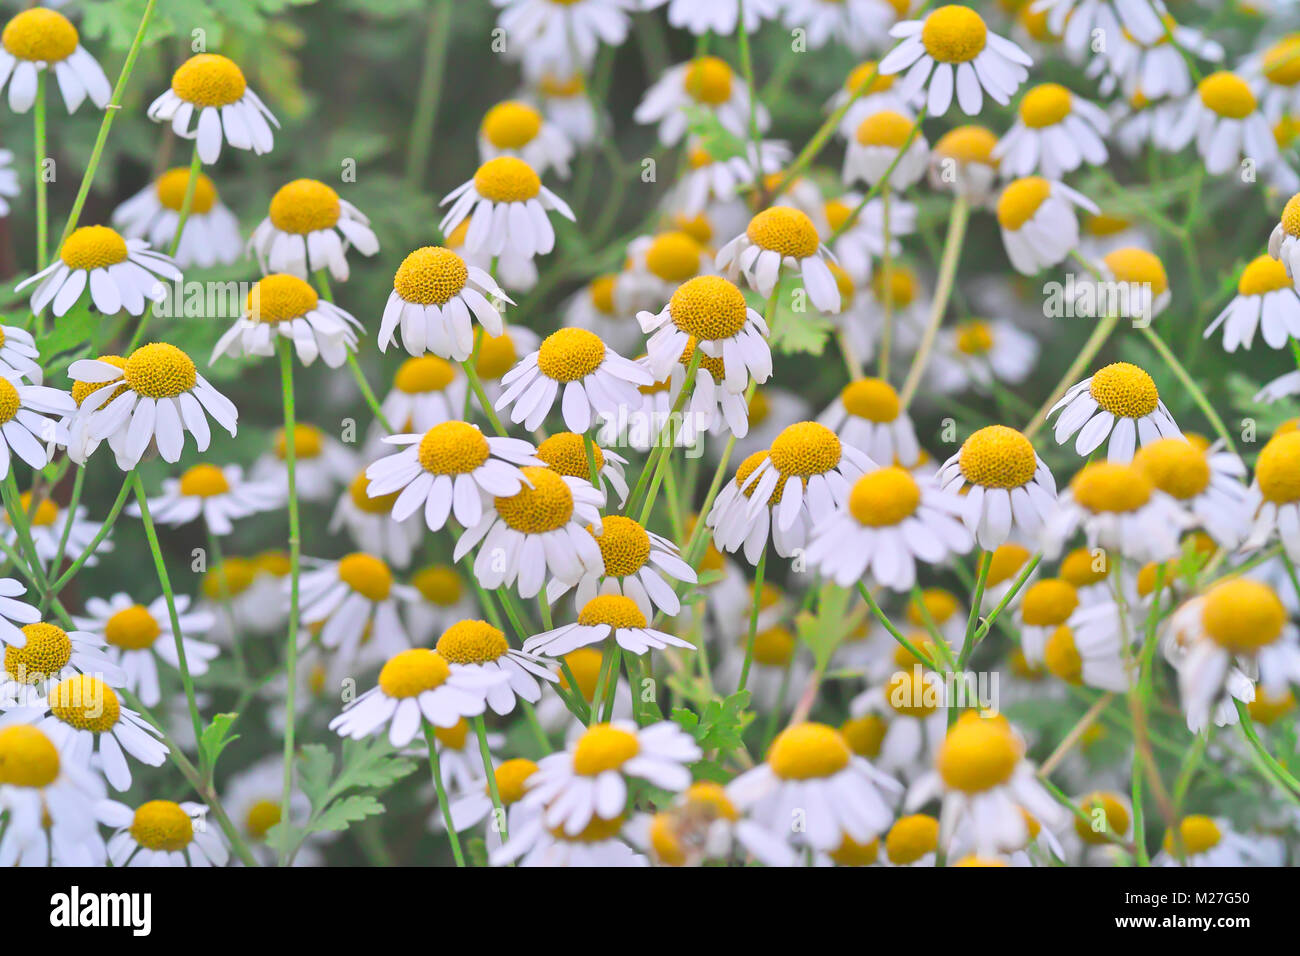 Many flowers of the medicinal herb feverfew in a bed Stock Photo